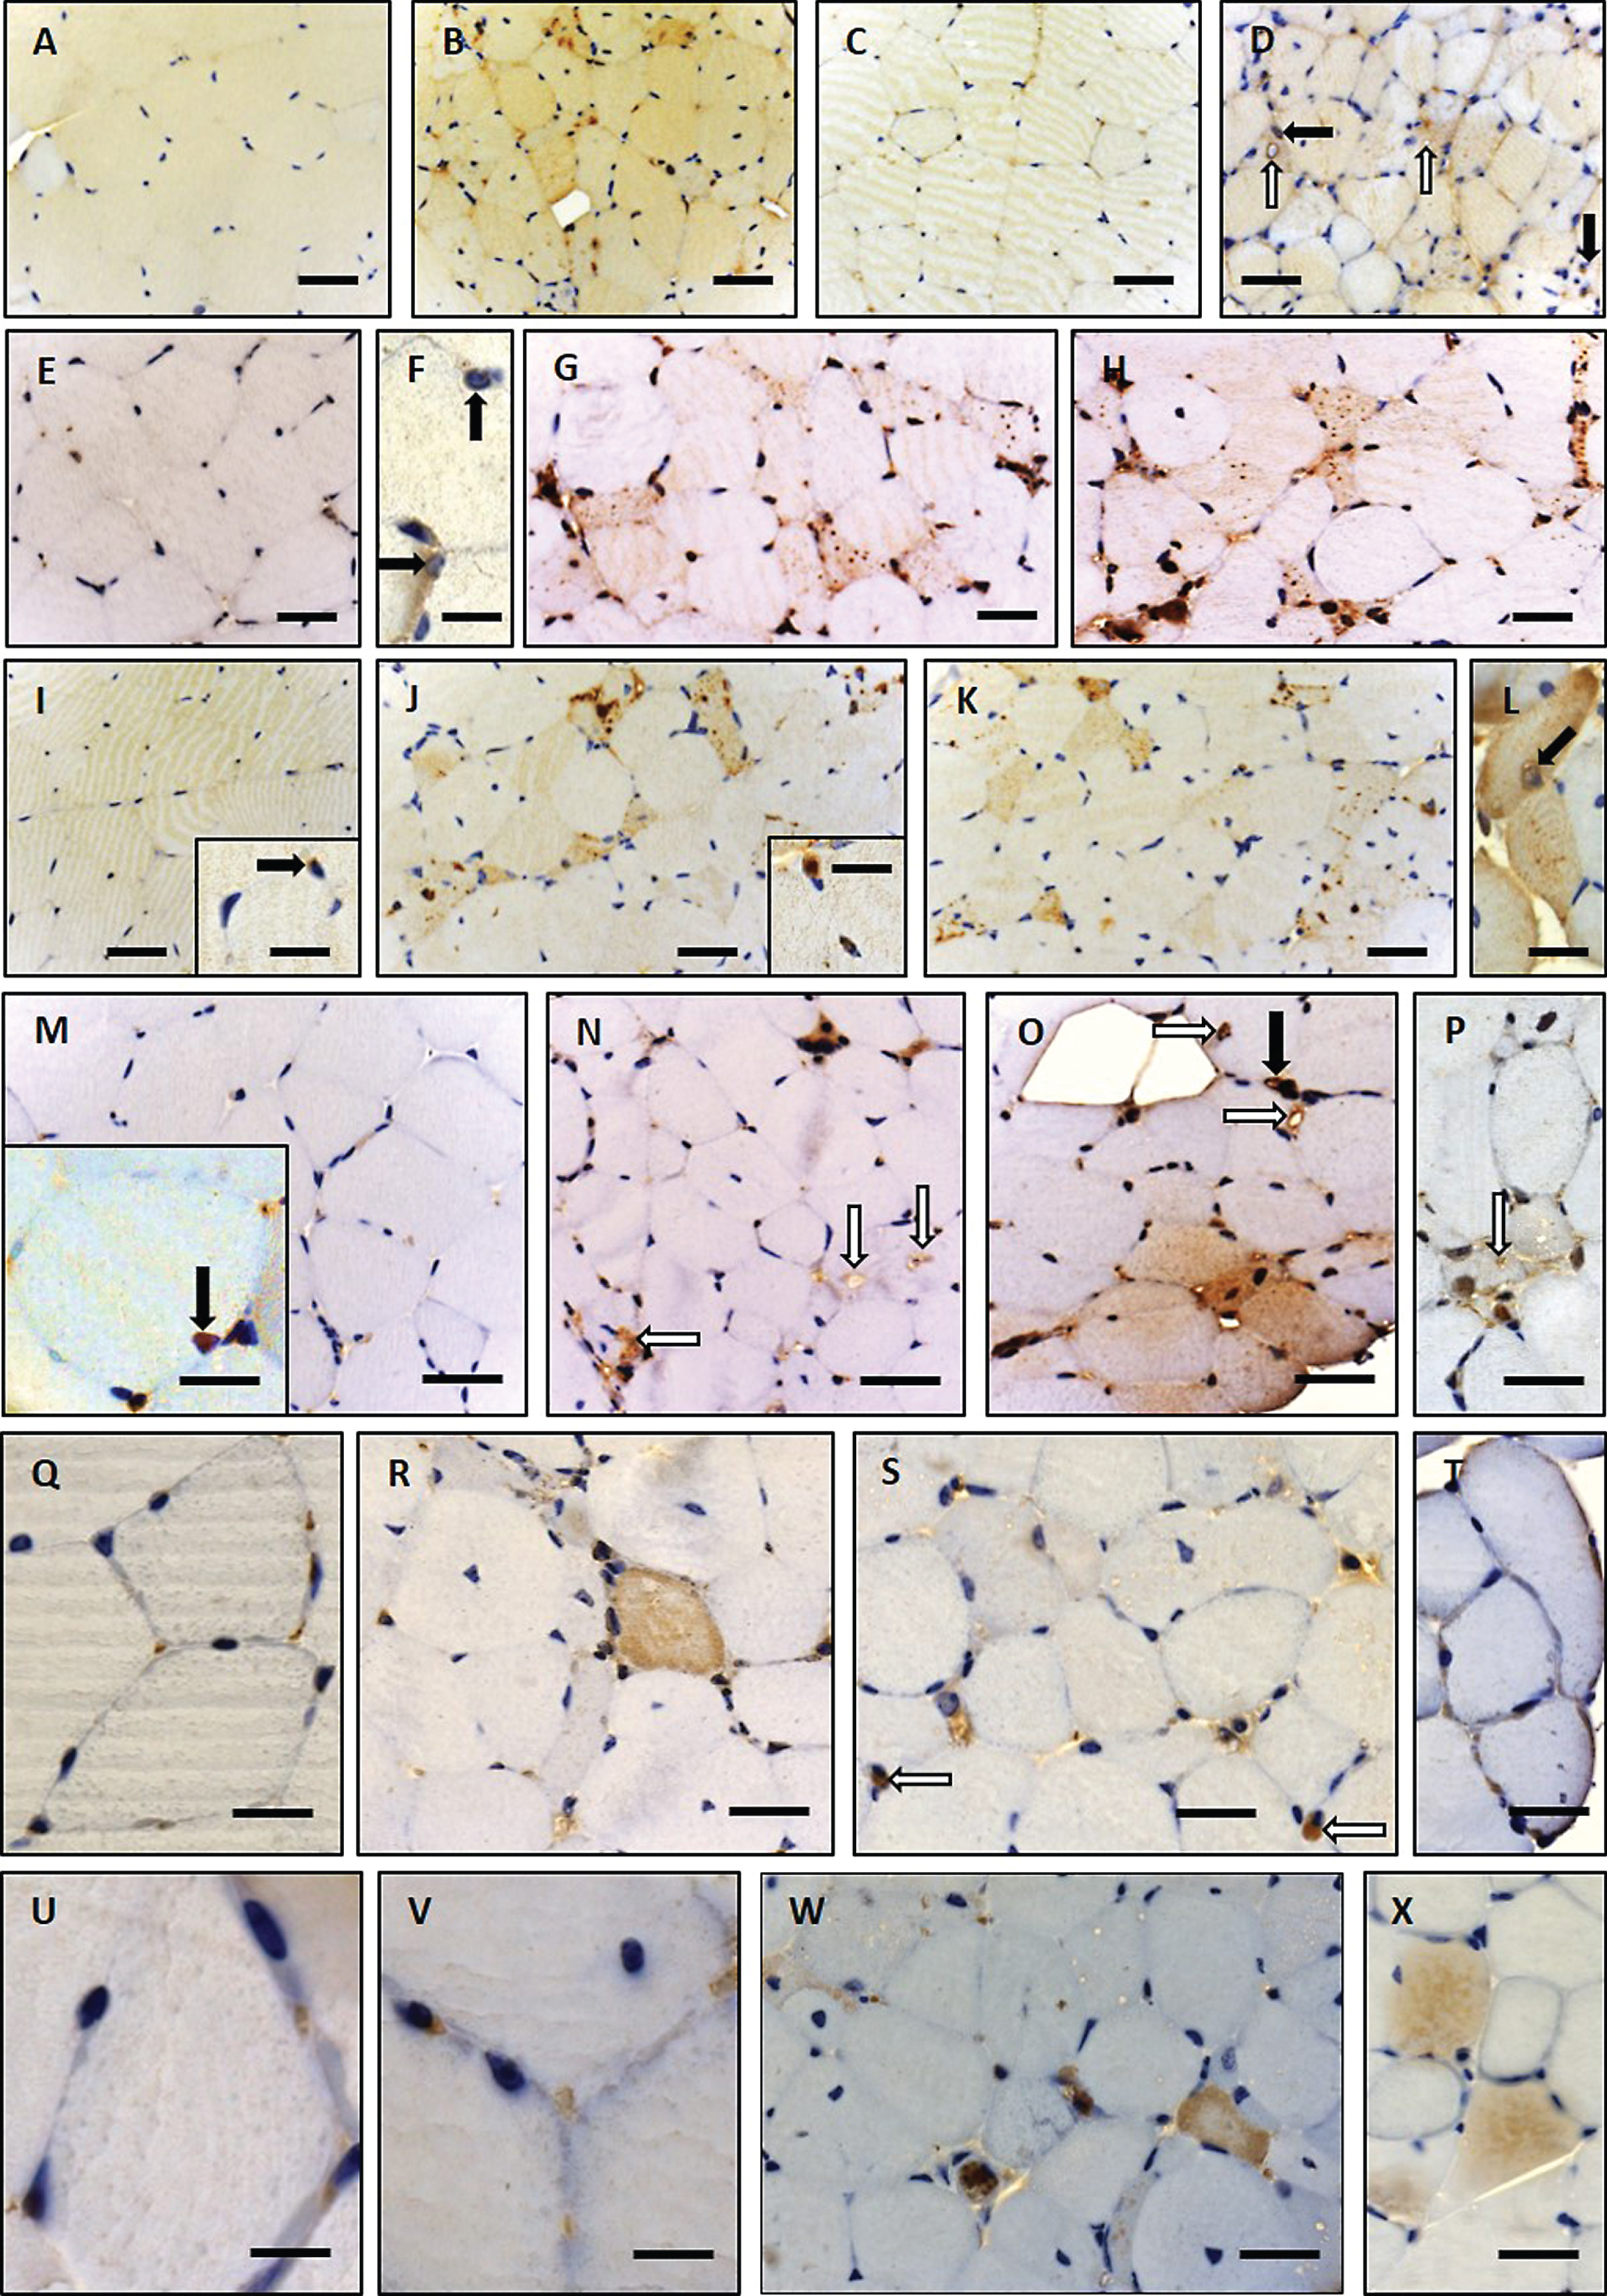 Immunohistochemistry of paraffin sections of paraformaldehyde-fixed quadriceps muscle specimens of 26-week-old wild type (A, C, E, F, I, M, Q and U) and woozy (B, D, G, H, J–L, N–P, R–T, V–X) animals: (A) weak creatine kinase (muscular) immunoreactivity of the sarcoplasm in wild type mouse muscle fibres. Scale bar = 22 μm. (B) Muscle fibres of normal size and especially partially atrophic muscle fibres showing increased muscle creatine kinase immunoreactivity. Scale bar = 19 μm. (C) Minor DJ-1 immunoreactivity of wild type mouse muscle and enhanced diffuse as well as perinuclear (black arrows) and vacuole-associated (white arrows) DJ-1 immunoreactivity in Sil1-mutant muscle fibres (D). Scale bars = 20 μm. (E) Minor diffuse immunoreactivity for the SIL1 binding partner BiP in wild type mouse muscle fibres is showing a sarcomeric pattern which probably corresponds to a labelling of the SR. Scale bar = 22 μm. (F) BiP immunoreactivity associated with myonuclei/ nuclear envelope (black arrows) in mouse wild type muscle fibres. Scale bar = 10 μm. (G and H) Partially atrophic and atrophic muscle fibres of a woozy animal show strong BiP immunoreactivity of subsarcolemmal and intermyofibrillar deposits, some of which are associated with vacuoles and myonuclei. Scale bars = 22 μm. (I) Diffuse immunoreactivity of TDP-43 within the sarcoplasm and occasionally in myonuclei (inset in I) of muscle fibres derived from wild type animals. Scale bar = 22 μm; in inset 10 μm. (J–L) In this woozy mouse muscle specimen, enhanced intermyofibrillär punctuate TDP-43 immunoreactivity is accompanied by prominent labelling of the perinuclear region and nuclear membrane (inset in J and L). Scale bars in J and K = 22 μm; inset in J = 10 μm and L = 15 μm. (M) Nuclear labelling after incubation with the LAP2 antibody in wild type mouse muscle. Scale bars in M = 22 μm, in inset = 10 μm. (N–P) Prominent LAP2 immunoreactivity of the abnormal vacuoles (white arrows) and of the sarcoplasm of woozy muscle fibres. Scale bars in N = 25 μm, in O = 22 μm, in P = 19 μm. (Q) Myonuclei with weak Emerin immunoreactivity in wild type muscle fibres. Scale bar = 10 μm. (R, S) Prominent immunoreactivity for Emerin in dystrophic muscle fibres (sarcoplasmic staining) and adjacent to myonuclei (white arrows). Scale bars = 19 μm. (T) Irregular Emerin immunoreactivity of the sub-sarcolemmal region. Scale bars in R and S = 20 μm, in T = 17 μm. (U) Myonuclei with very weak Lamin A/C immunoreactivity in wild type muscle fibres. Scale bar = 6 μm. (V) Prominent immunoreactivity for Lamin A/C adjacent to myonuclei and (W, X) in lesioned muscle fibres (sarcoplasmic staining). Scale bars in V = 6 μm, in W and X = 25 μm.